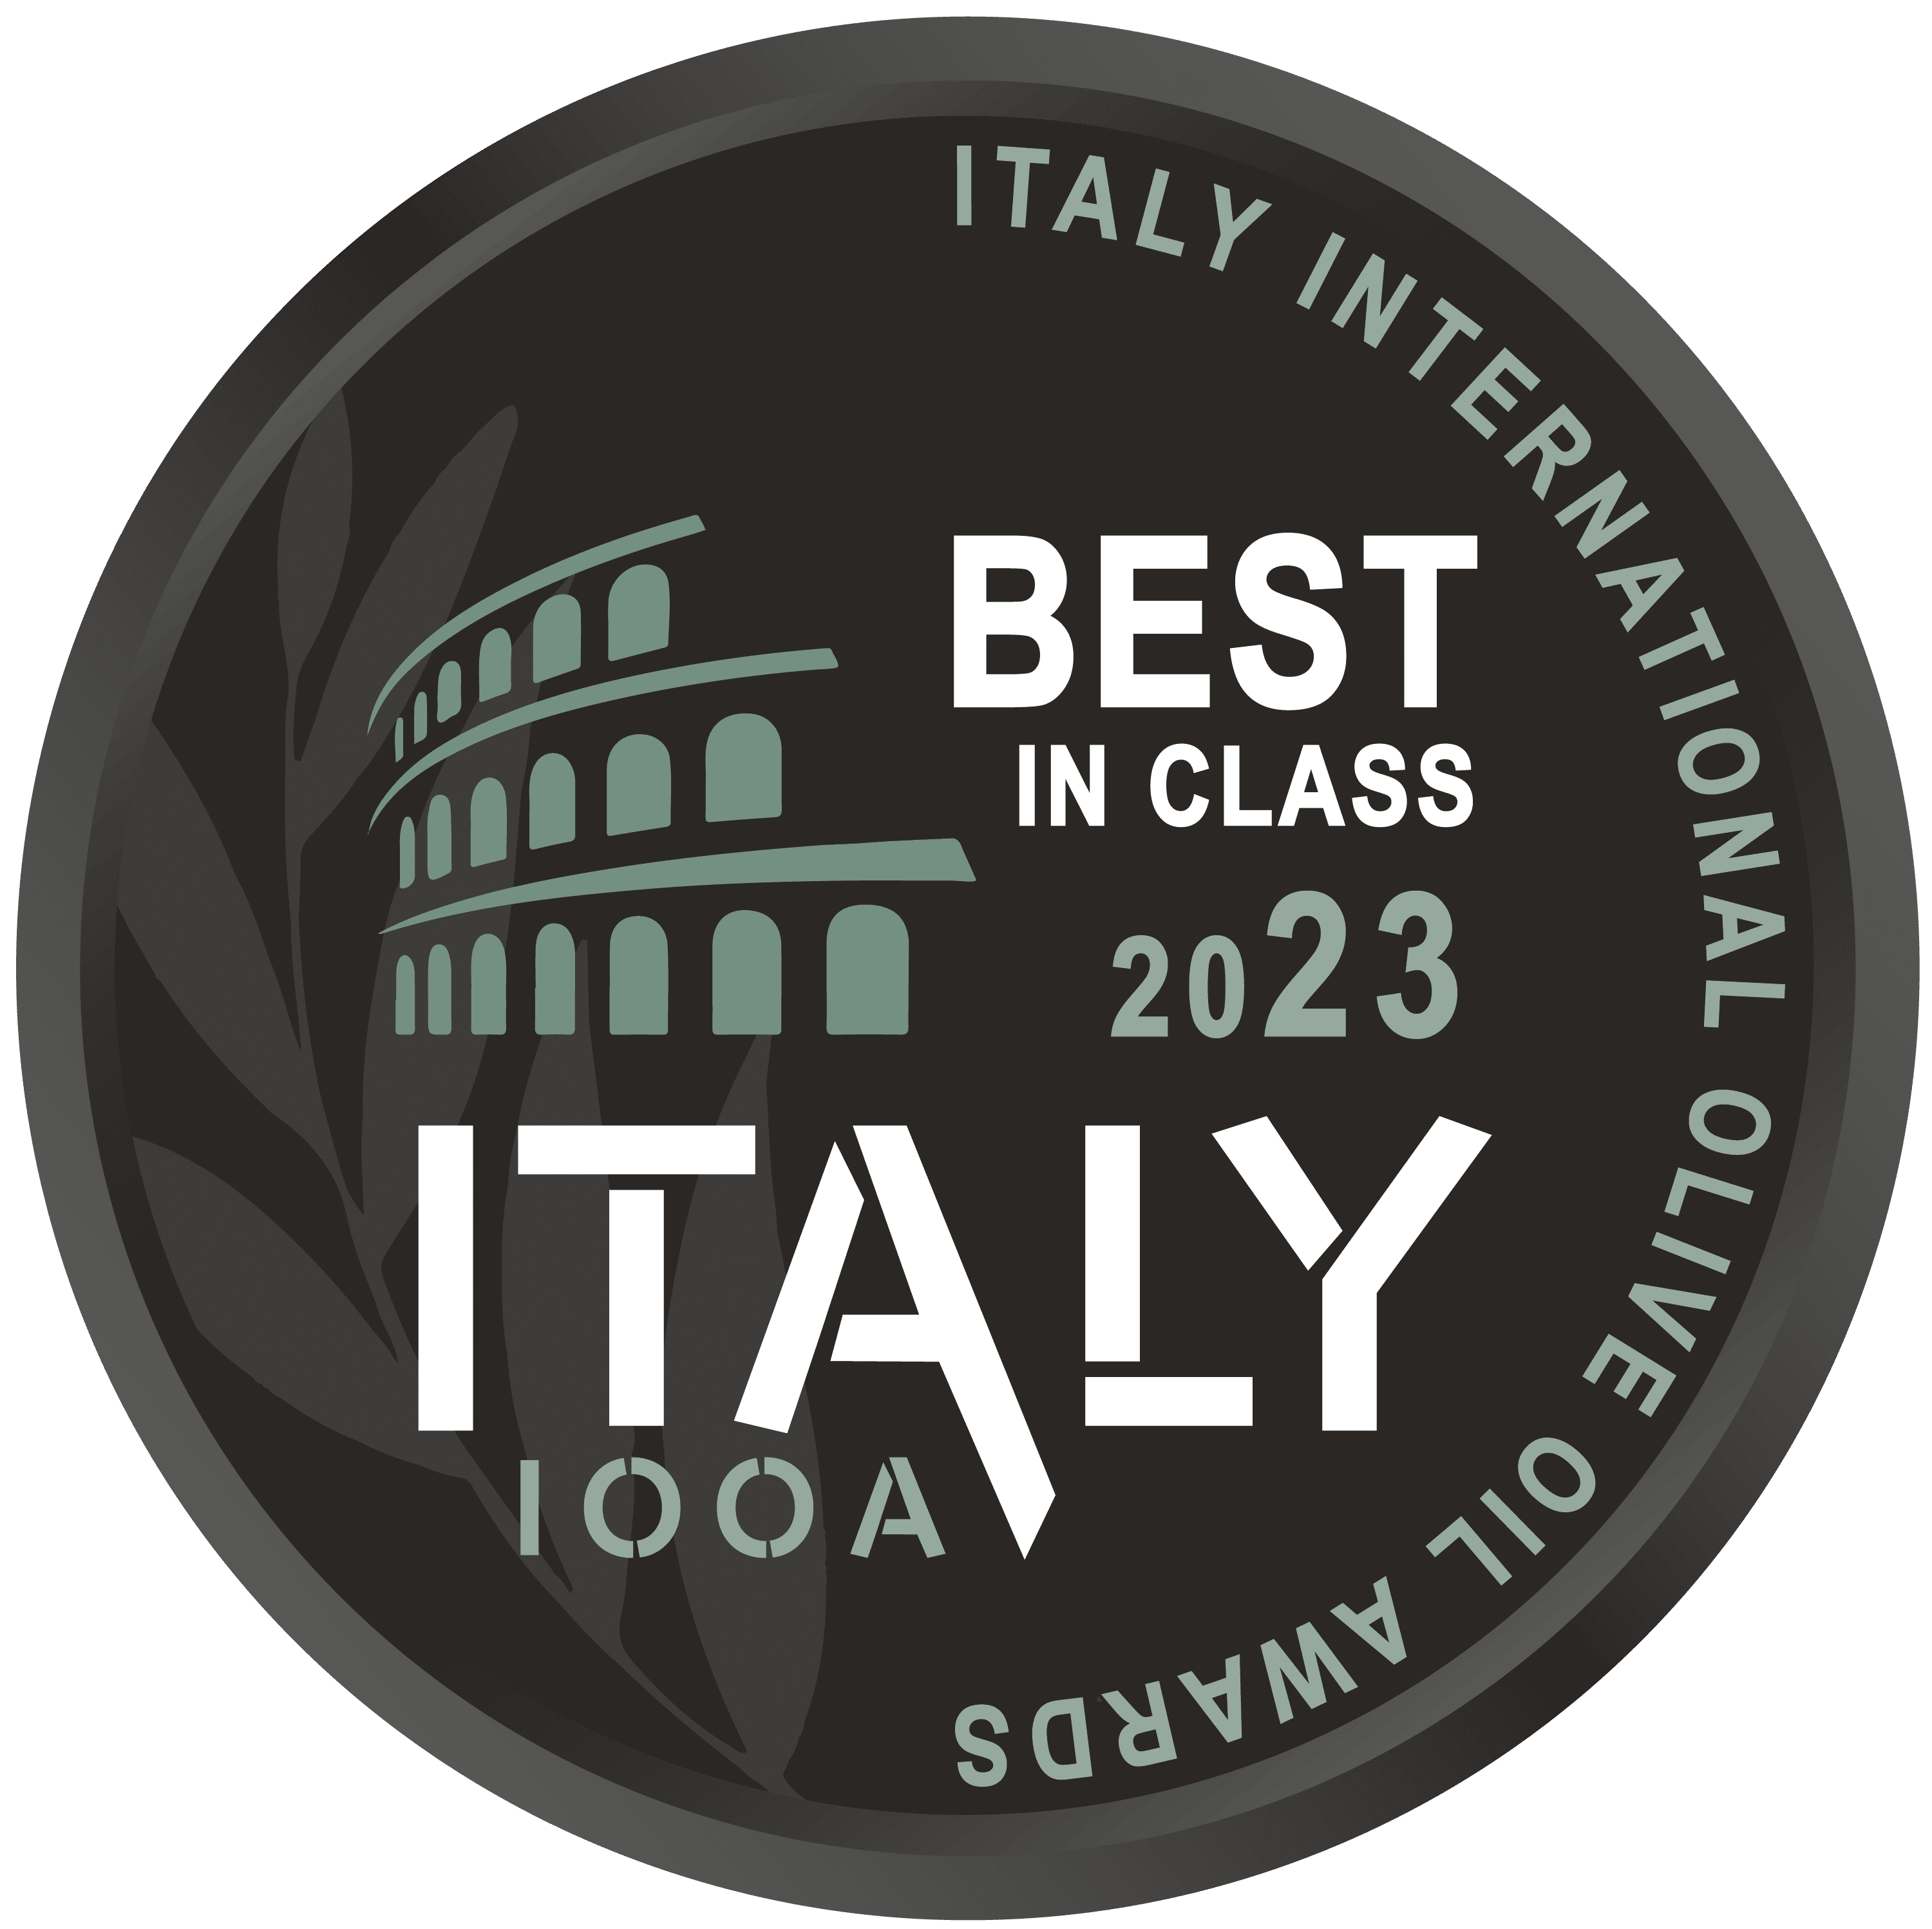 Best in Class - Italy IOOA 2023